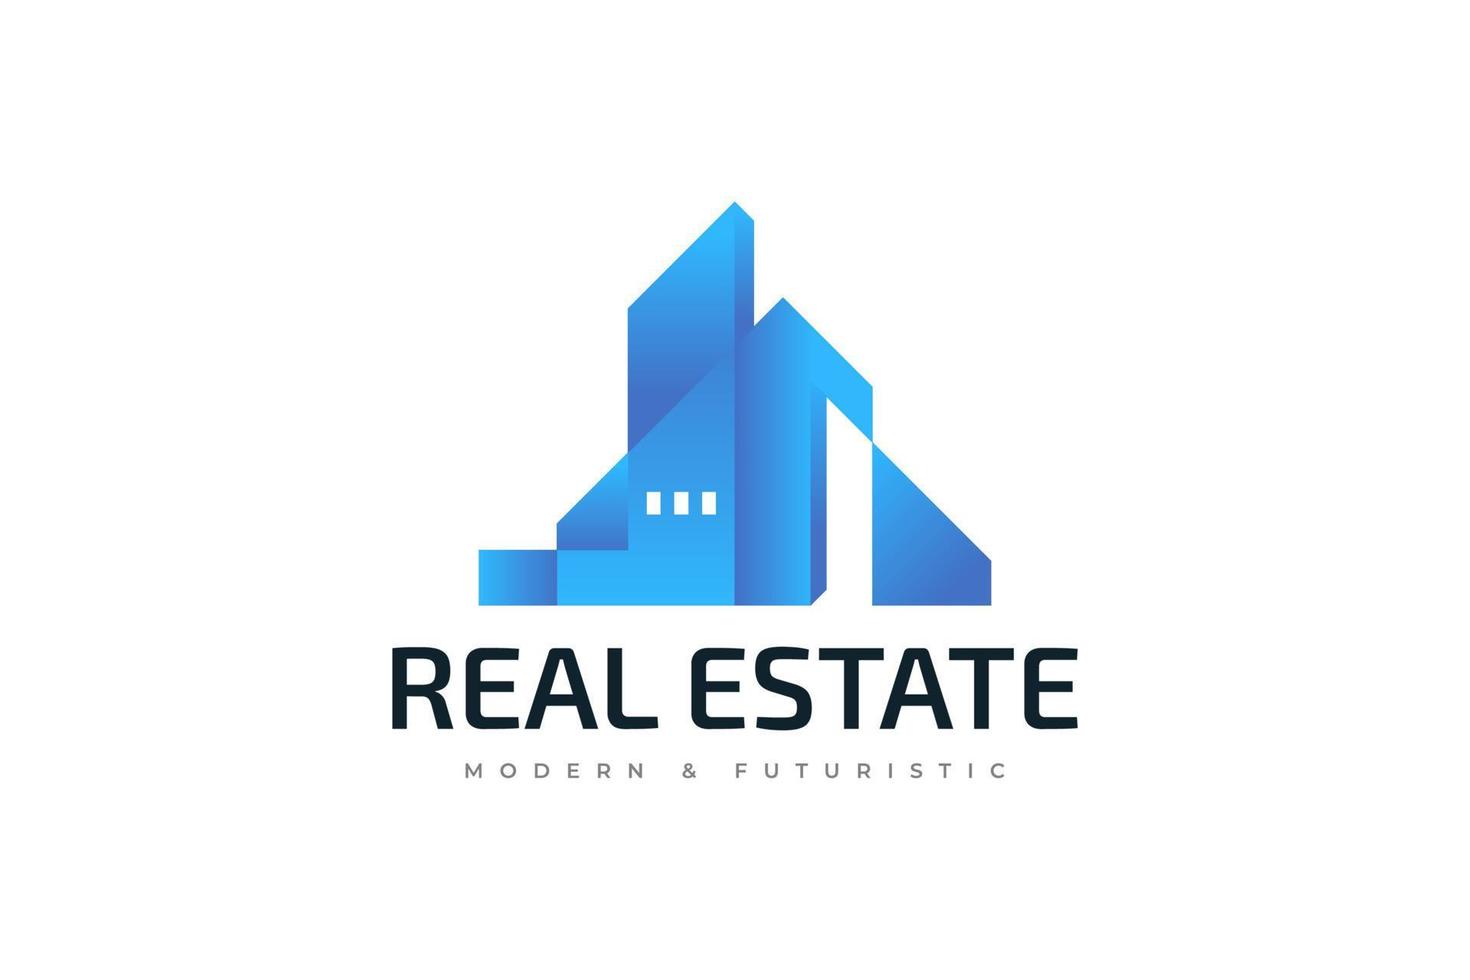 Modern and Futuristic Real Estate Logo Design. Abstract Blue Building Logo. Architecture or Construction Industry Brand Identity vector